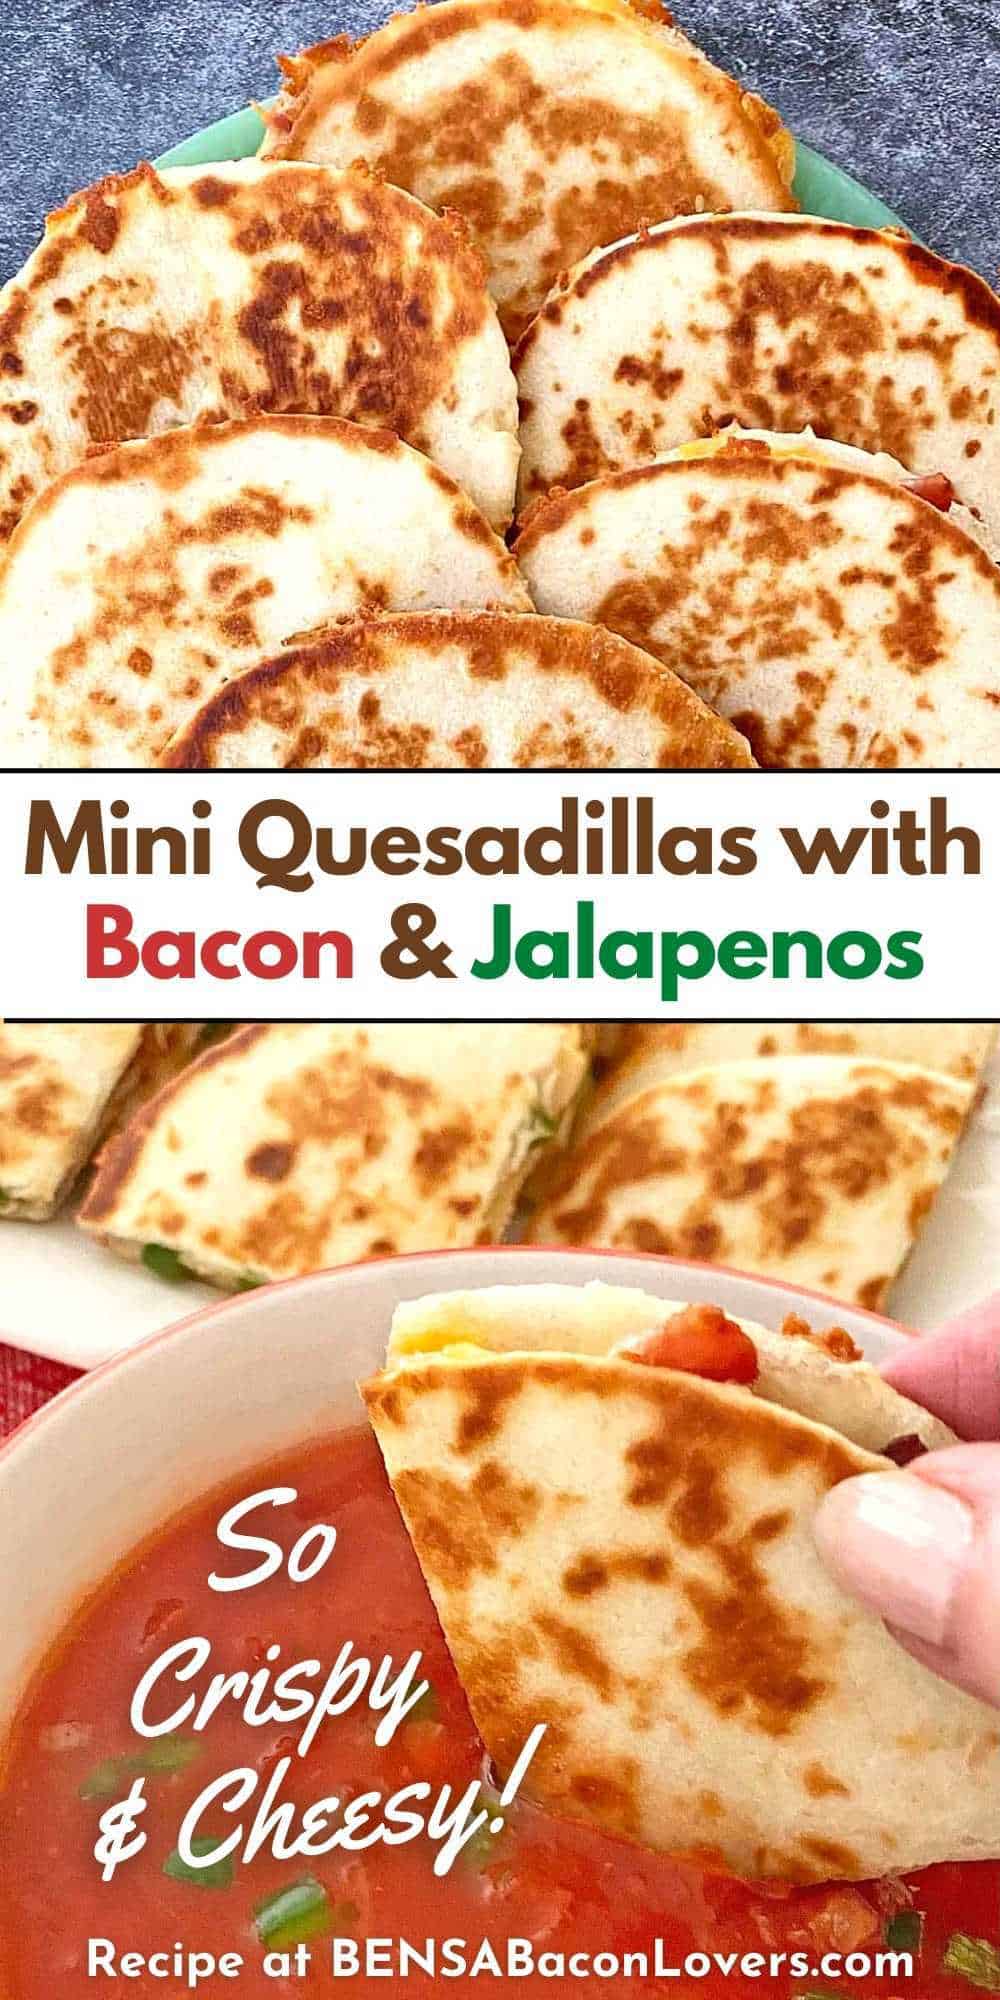 Six mini quesadillas on a serving plate, and a hand dipping a quartered quesadilla in salsa.